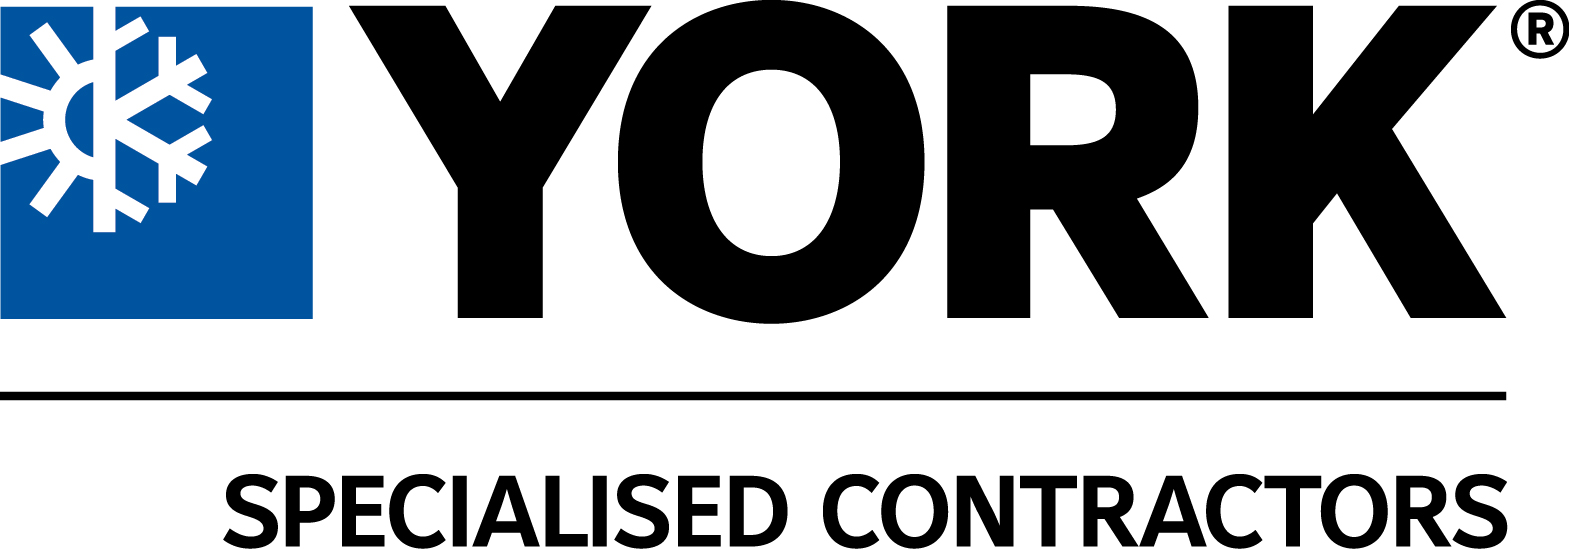 Johnson Controls launches contractor partnership initiative: YORK® Specialised HVAC Contractor Programme